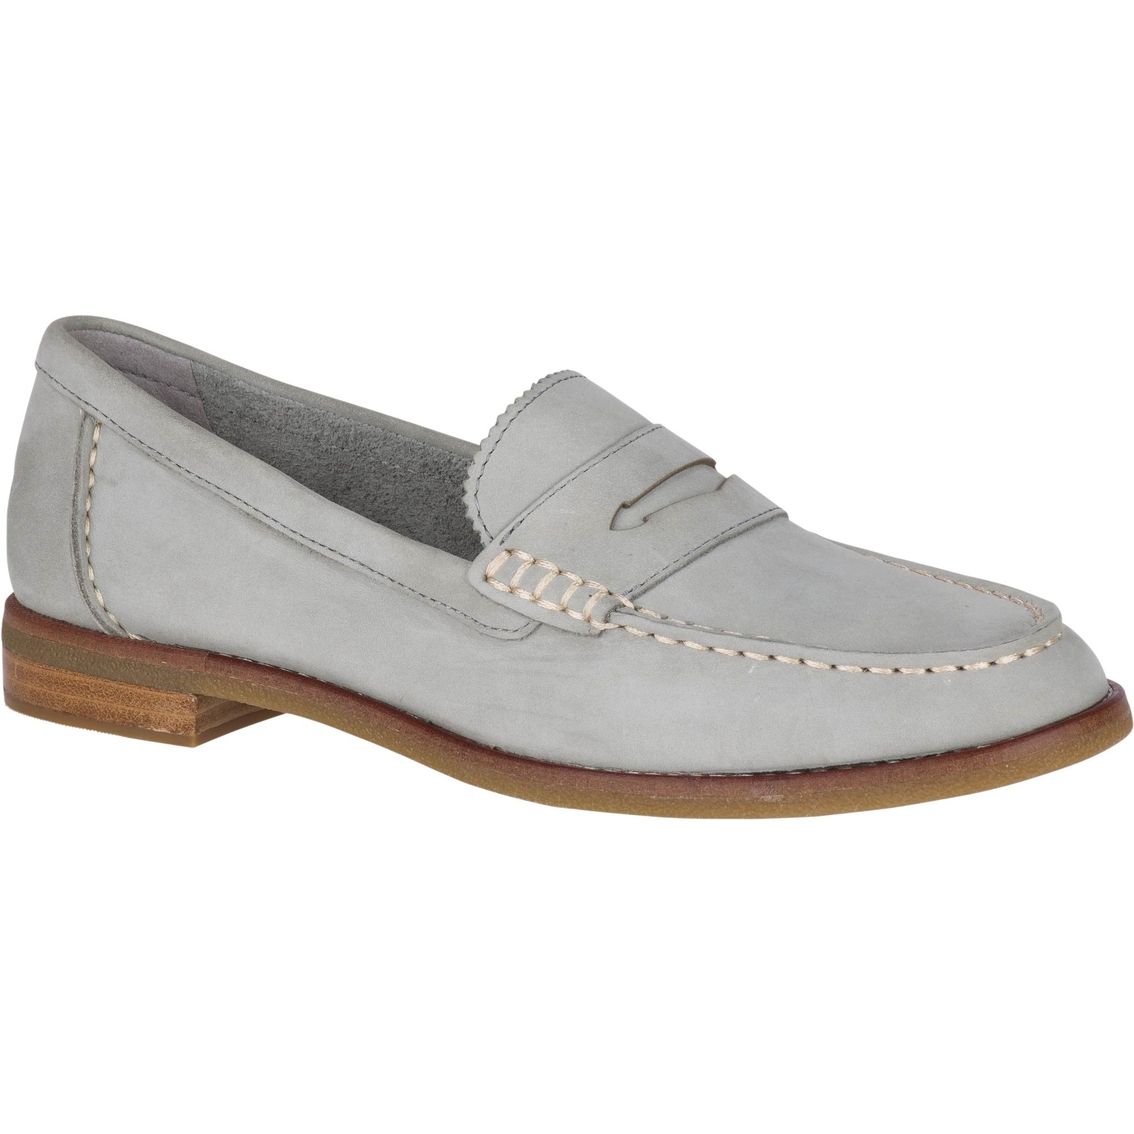 Sperry Women's Seaport Penny Loafer | Casuals | Shoes | Shop The Exchange